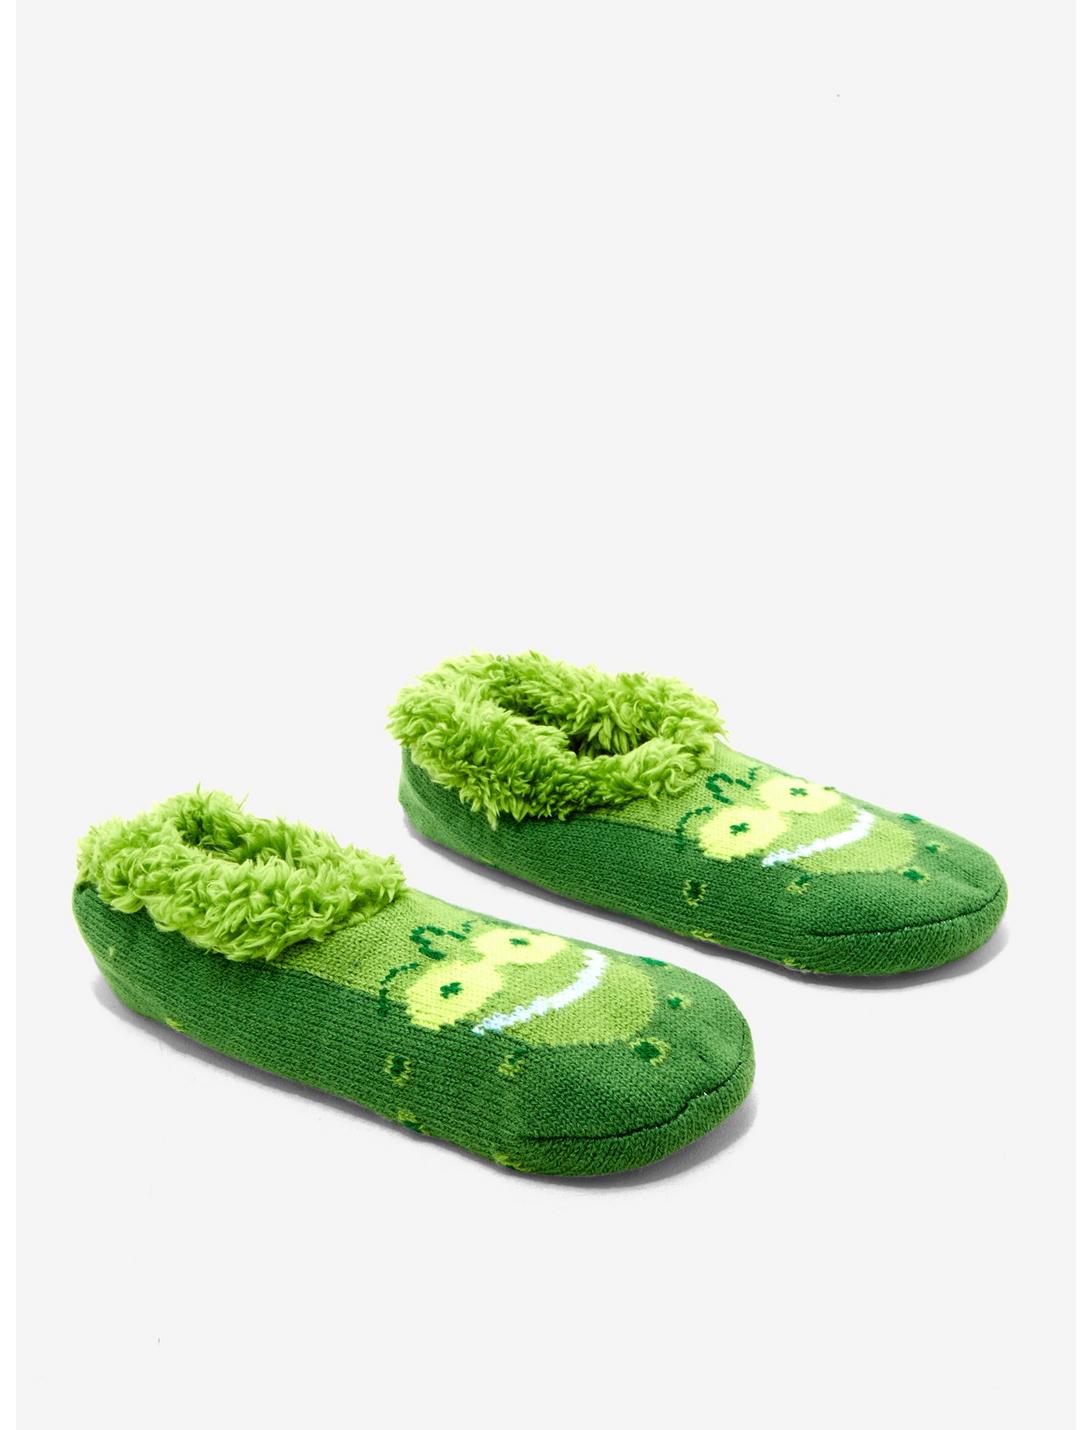 Rick And Morty Slip-On Pickle Rick Slippers, , hi-res